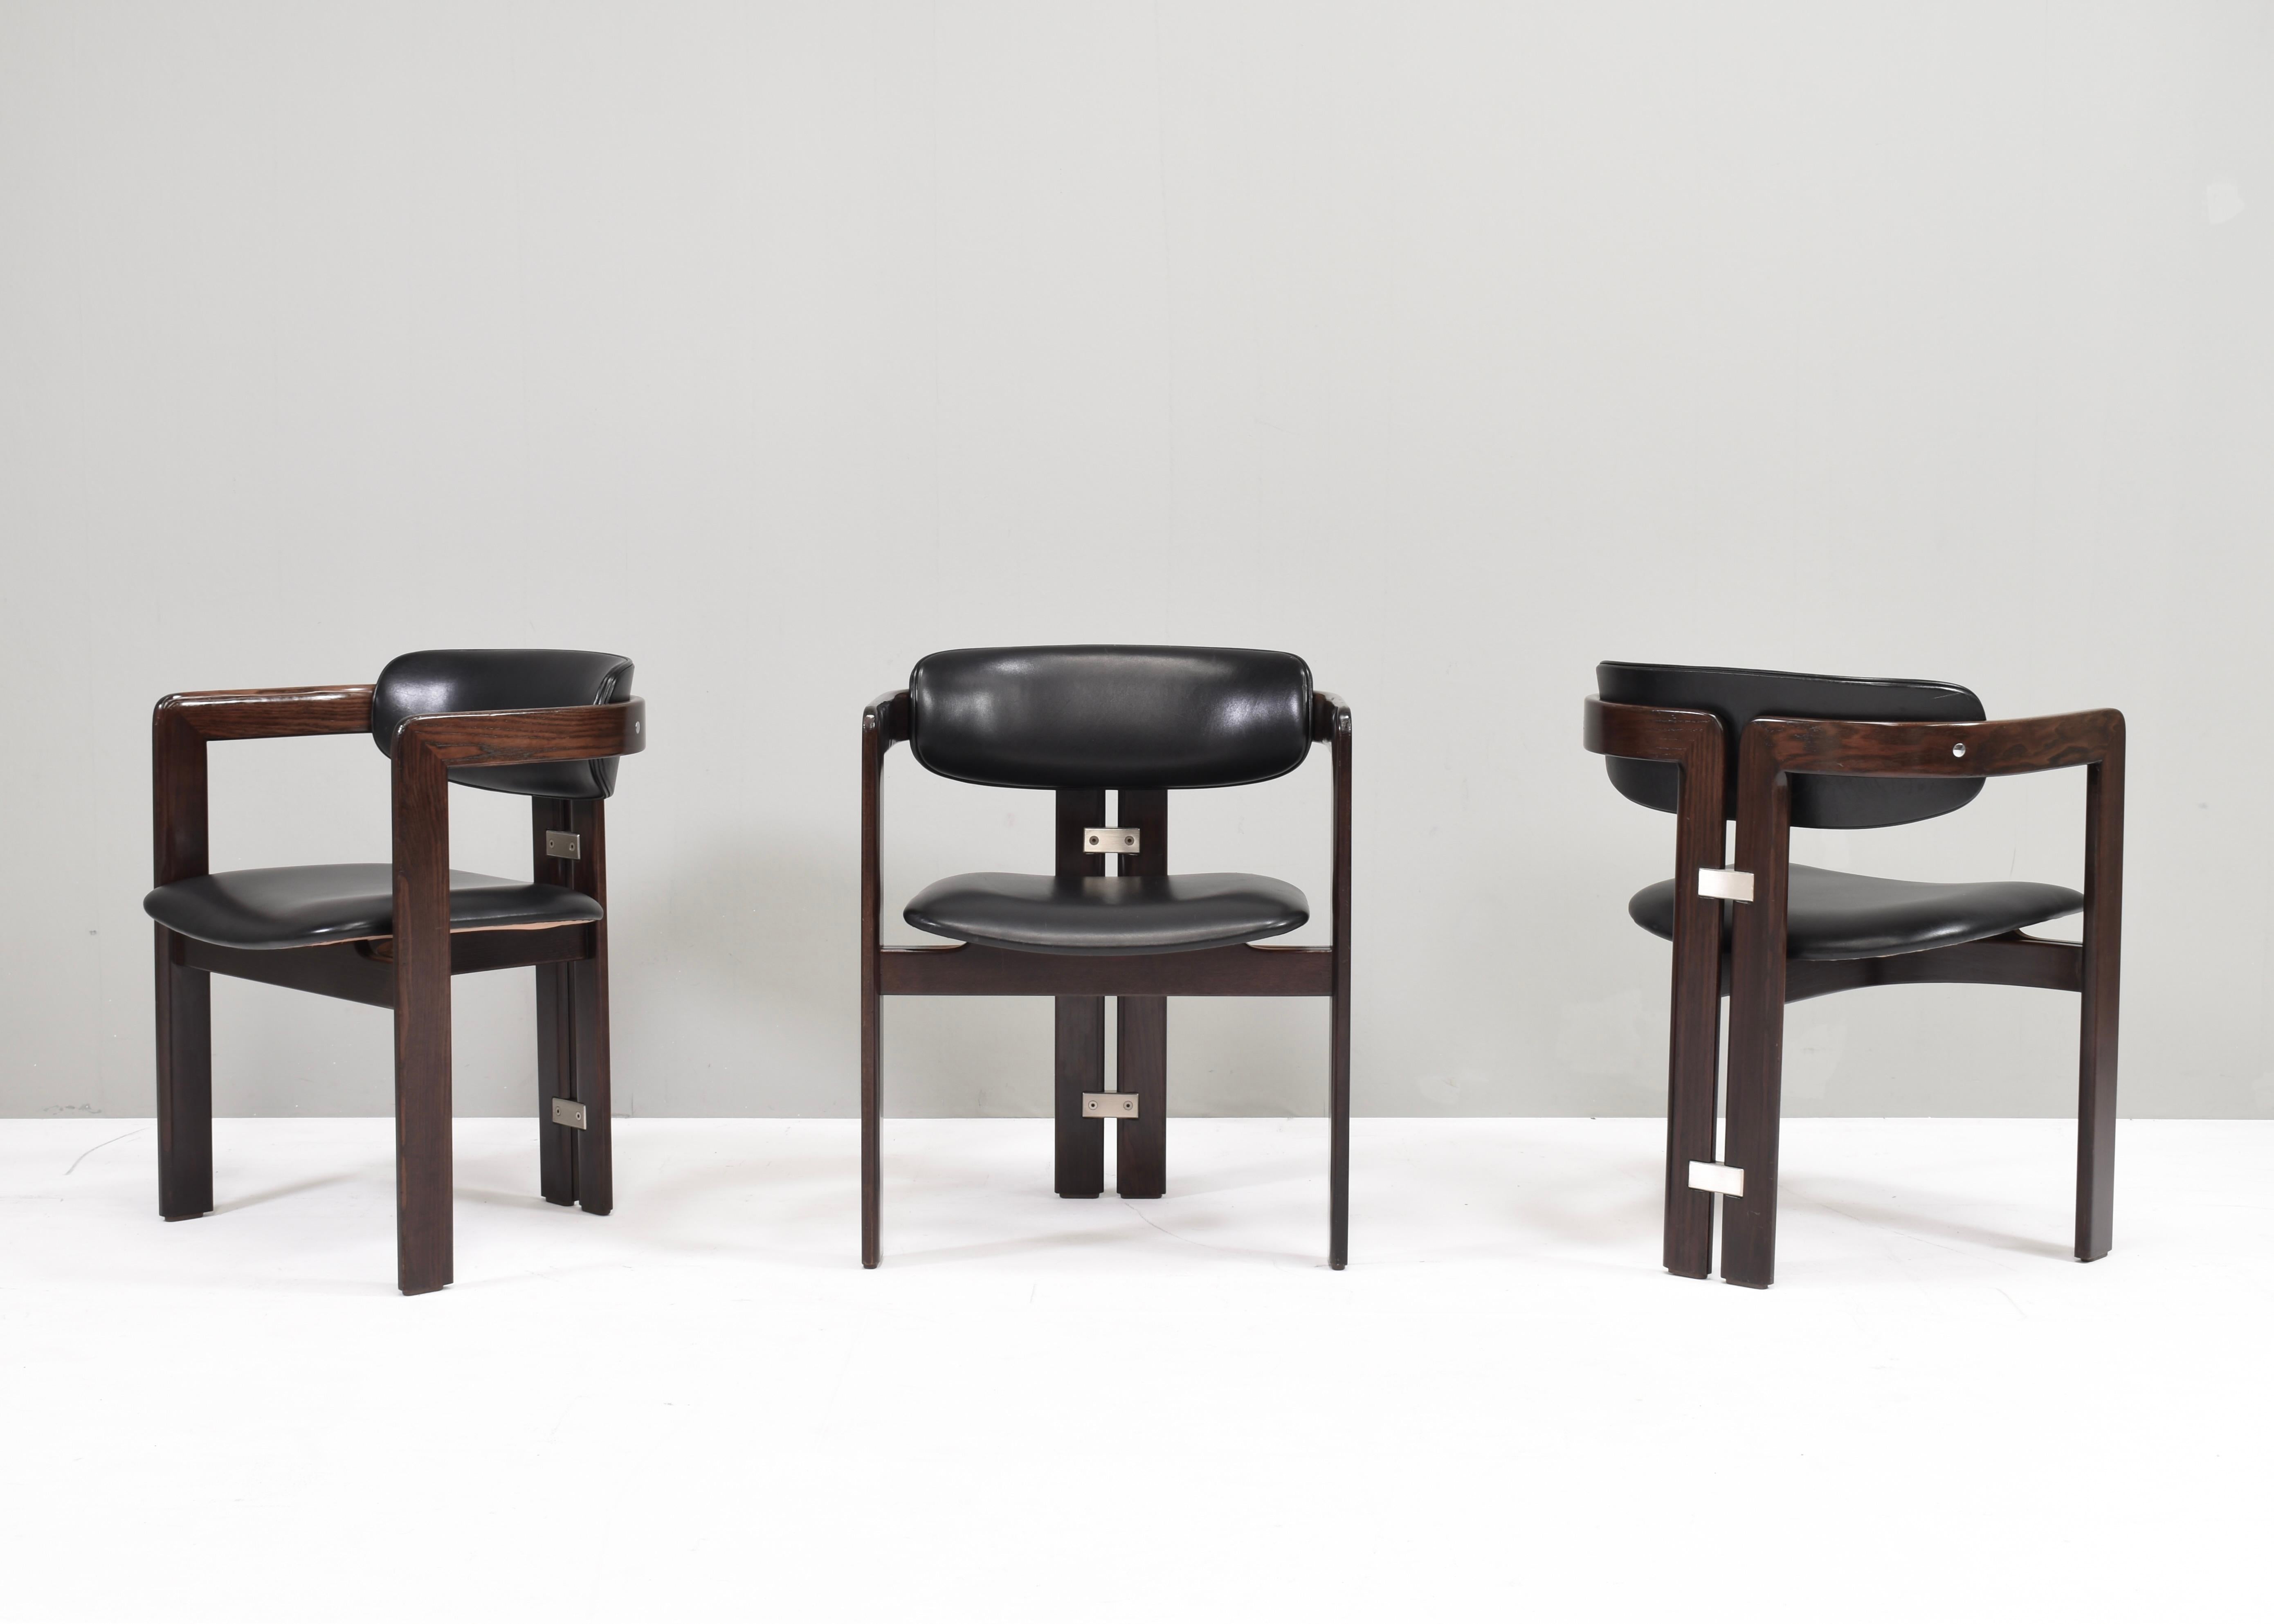 Introducing Pozzi's Pamplona Chairs by Augusto Savini - Italy, 1965.

The chairs represent a harmonious blend of Italian design flair, craftsmanship, and comfort. Augusto Savini, a renowned designer, is celebrated for his ability to infuse elegance